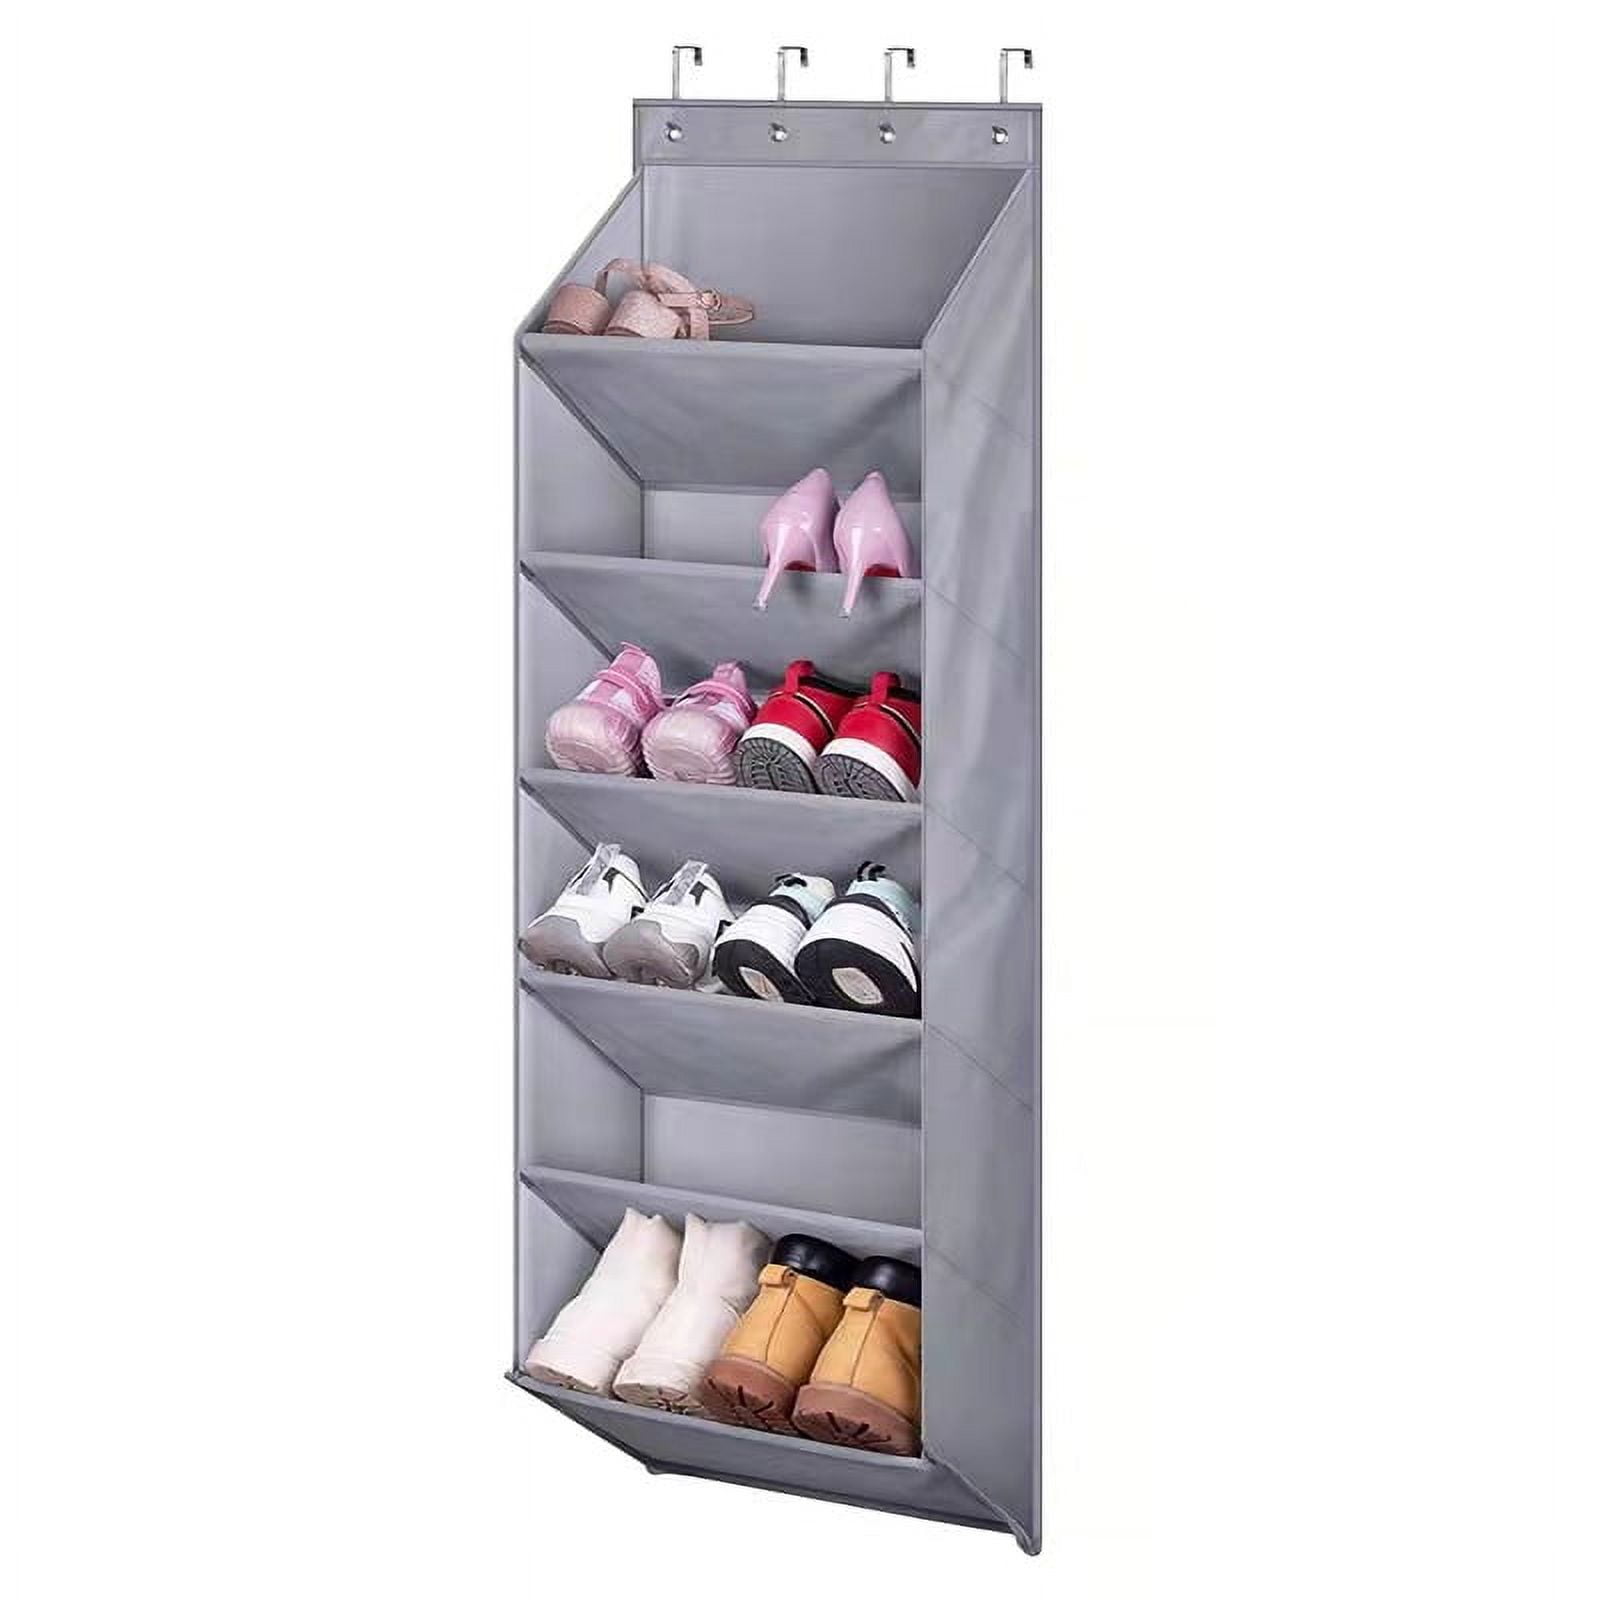  Sweetude 2 Pcs over The Door Shoe Organize with 12 Large  Pocket, Hanging Shoe Holder, Narrow Hanging Shoe Rack for Closet Shoe  Organizer for Wall, over Door Storage for Closet Kids